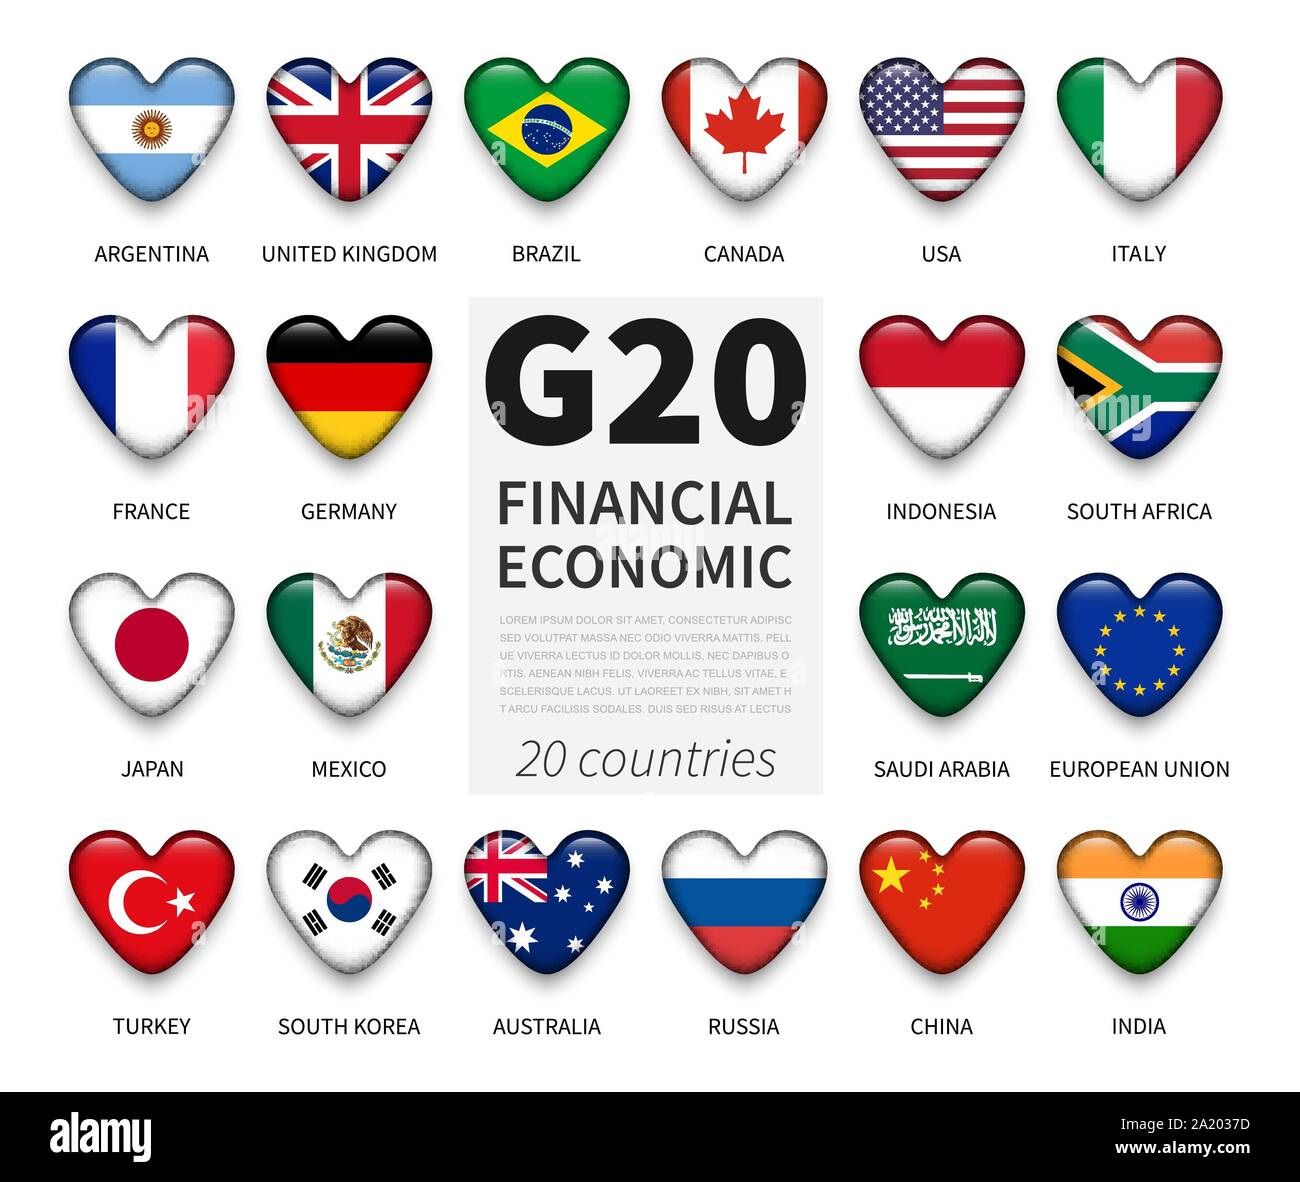 G20 . Group of Twenty countries and membership flag . International association of government econimic and financial . Heart button with shiny glass c Stock Vector